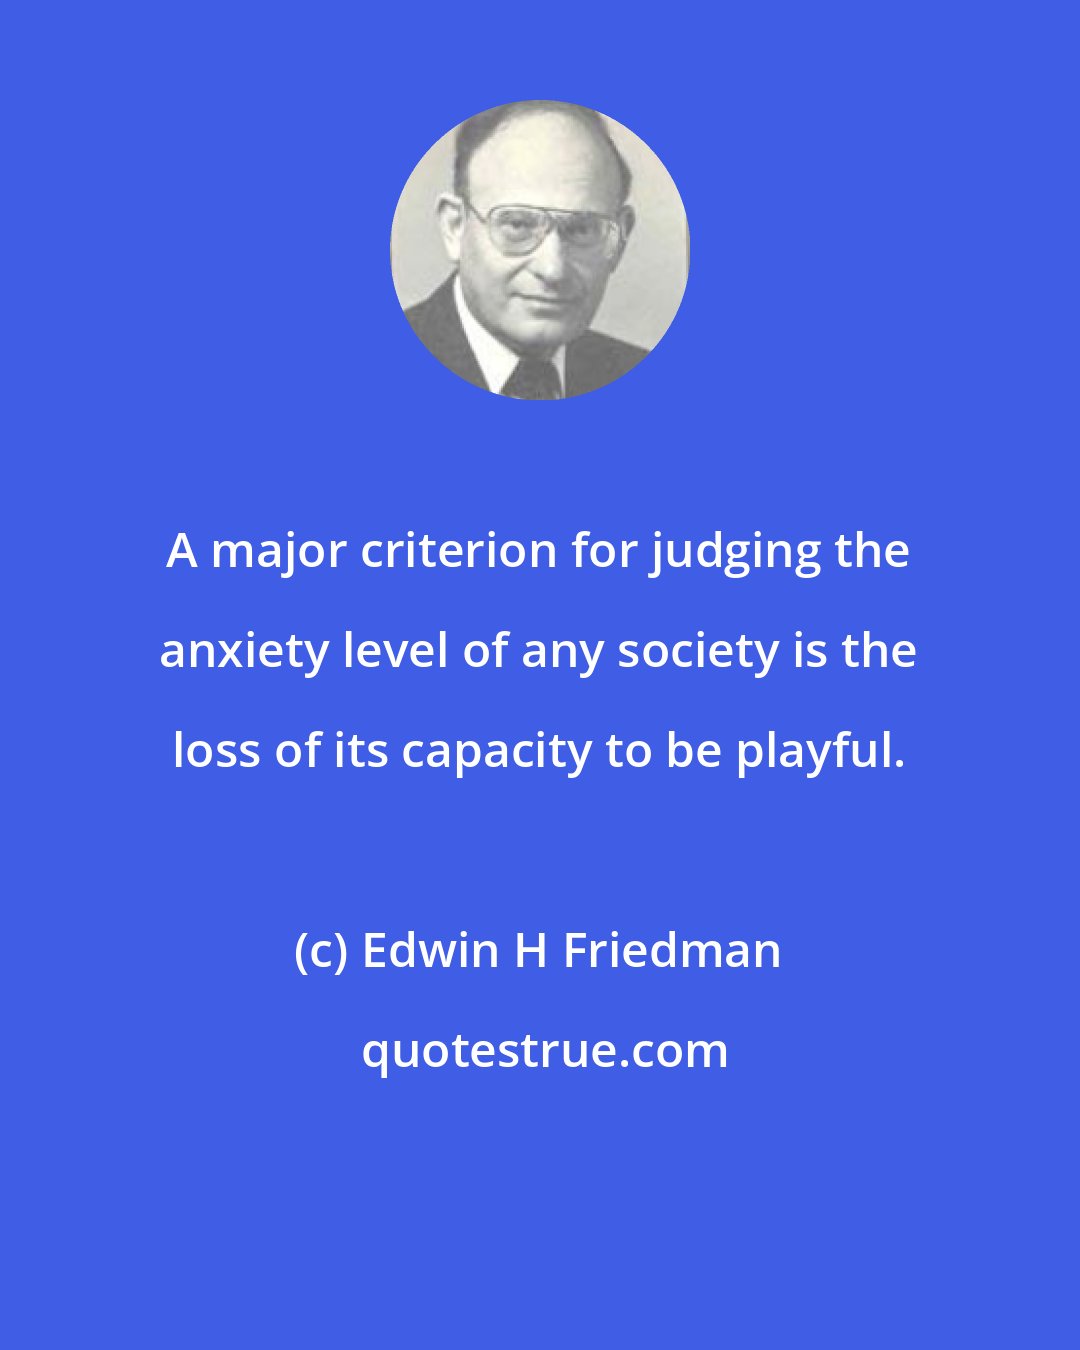 Edwin H Friedman: A major criterion for judging the anxiety level of any society is the loss of its capacity to be playful.